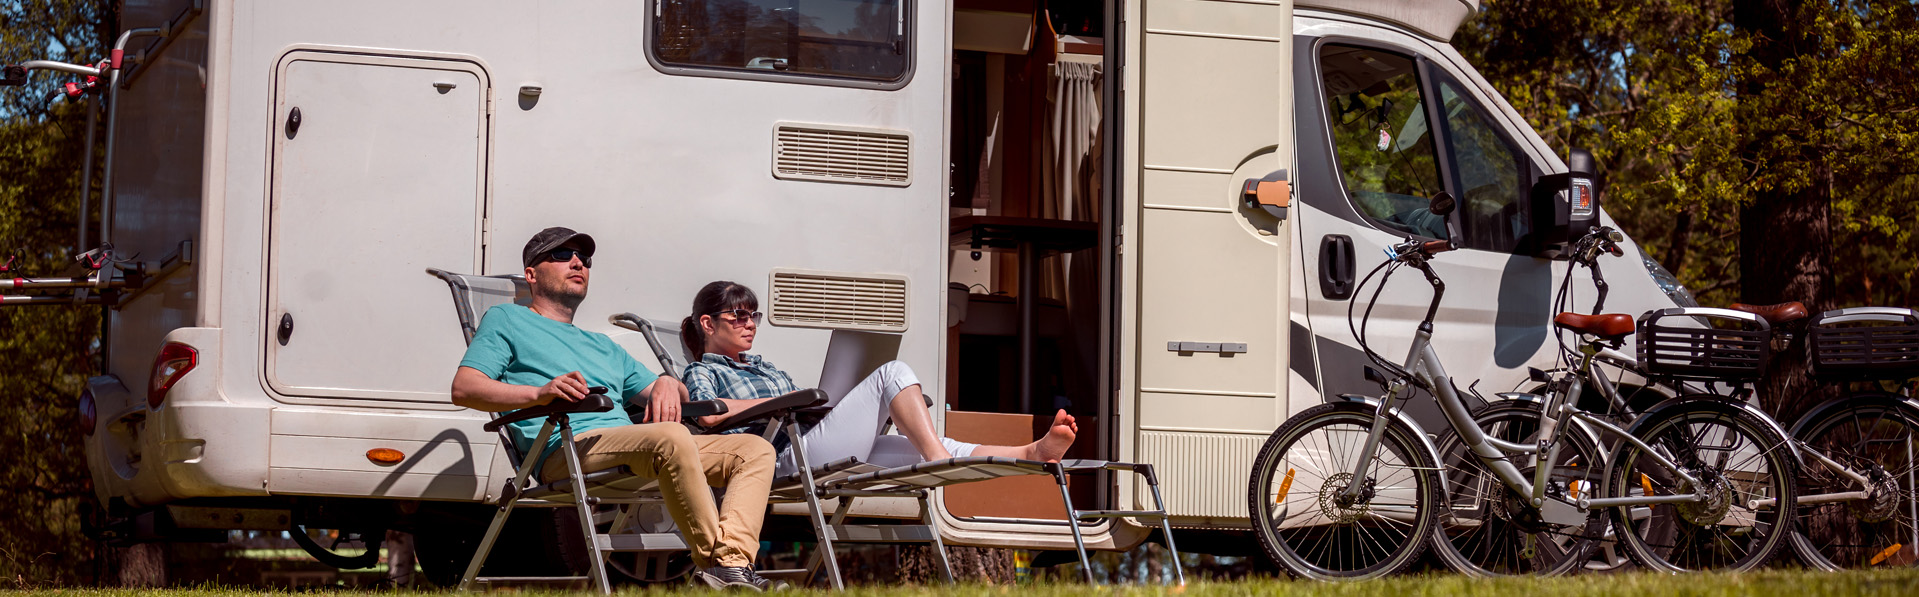 Couple relaxing by their RV